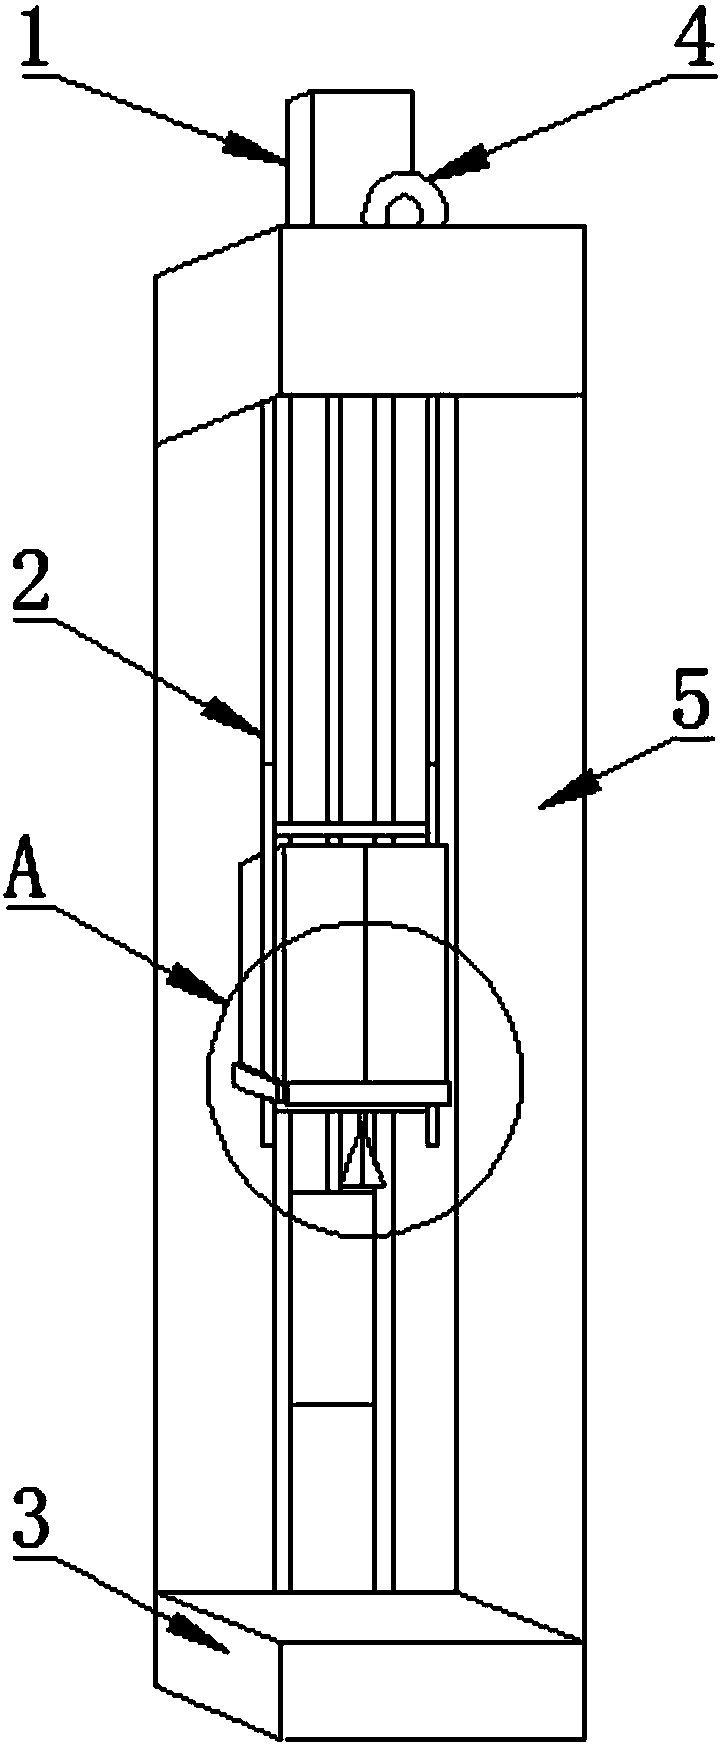 A buffer control device for an elevator car falling out of control